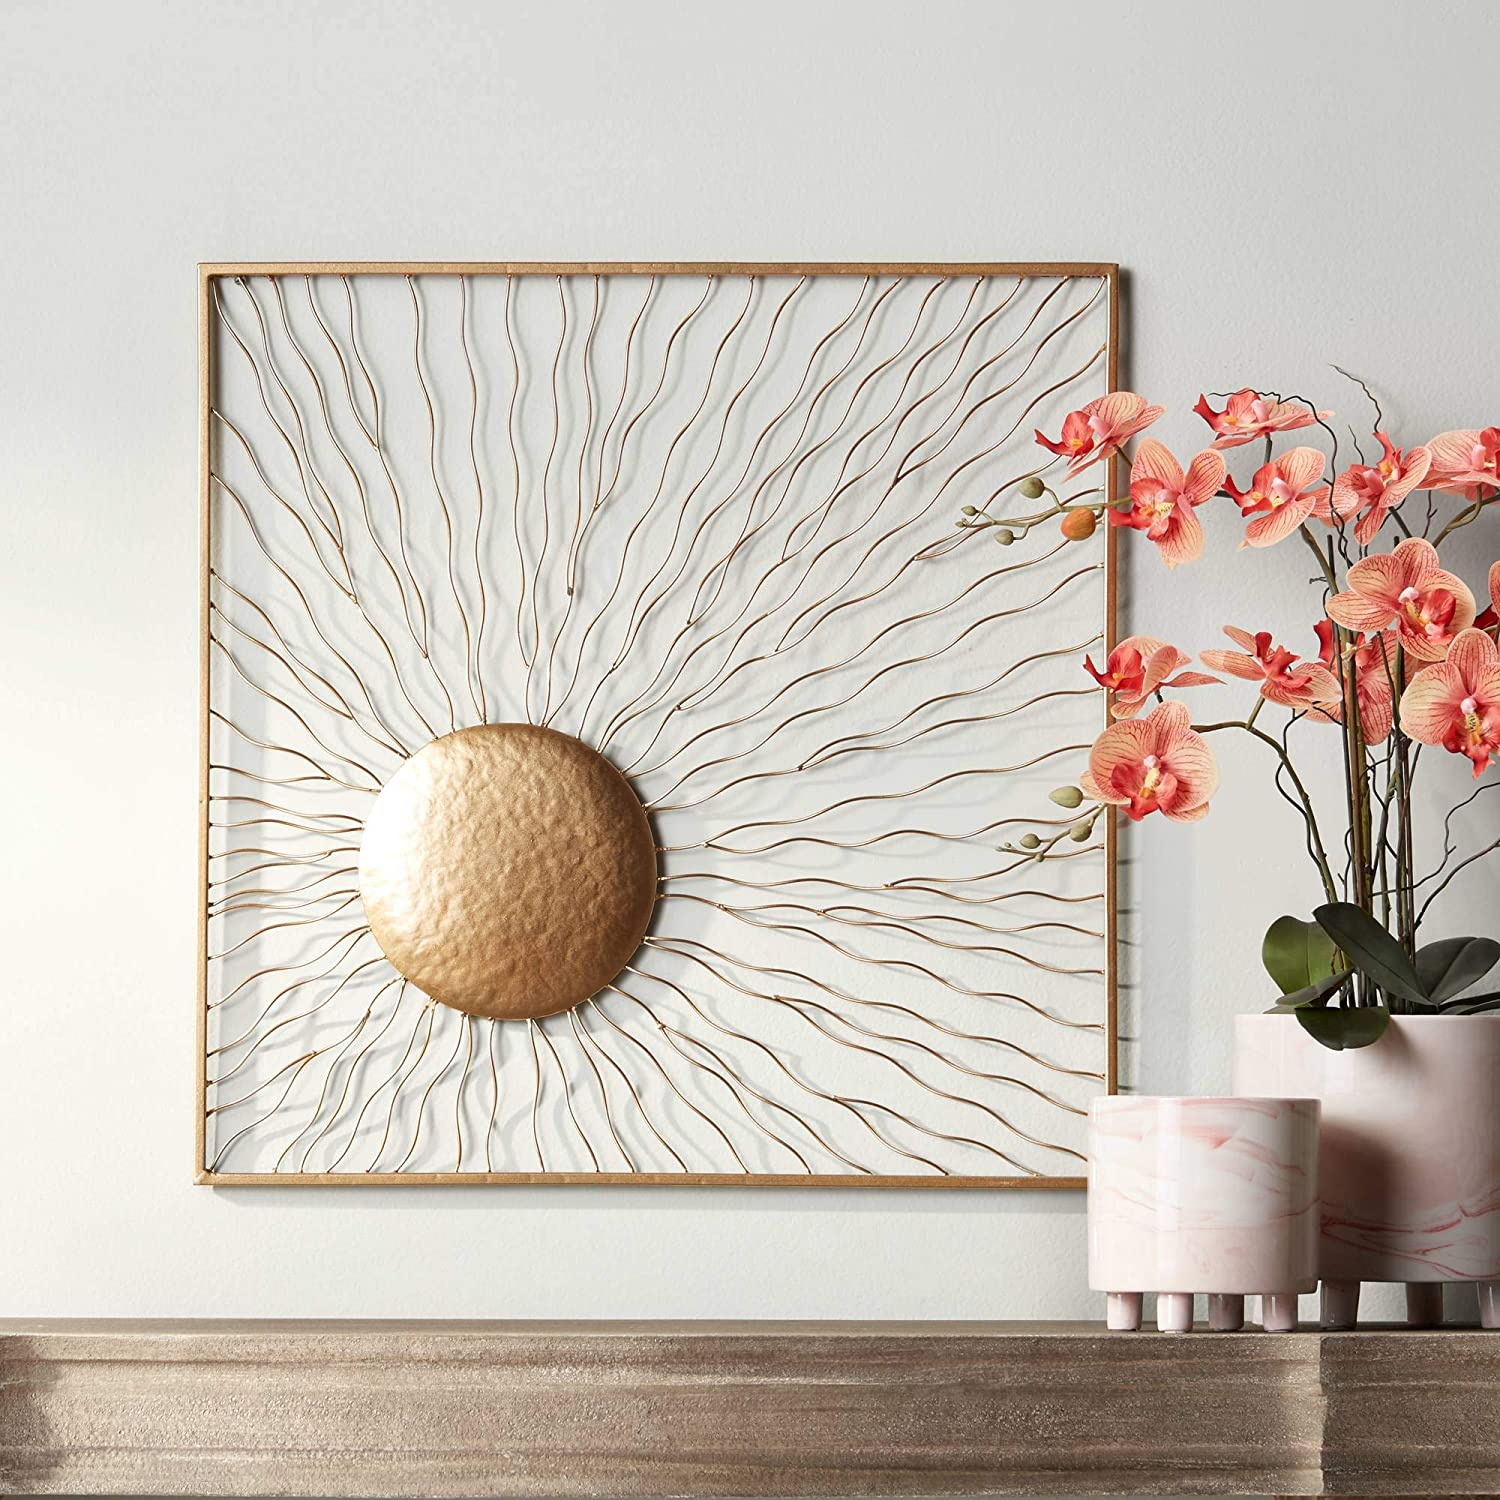 Magnificent Wall Art for Focal Points